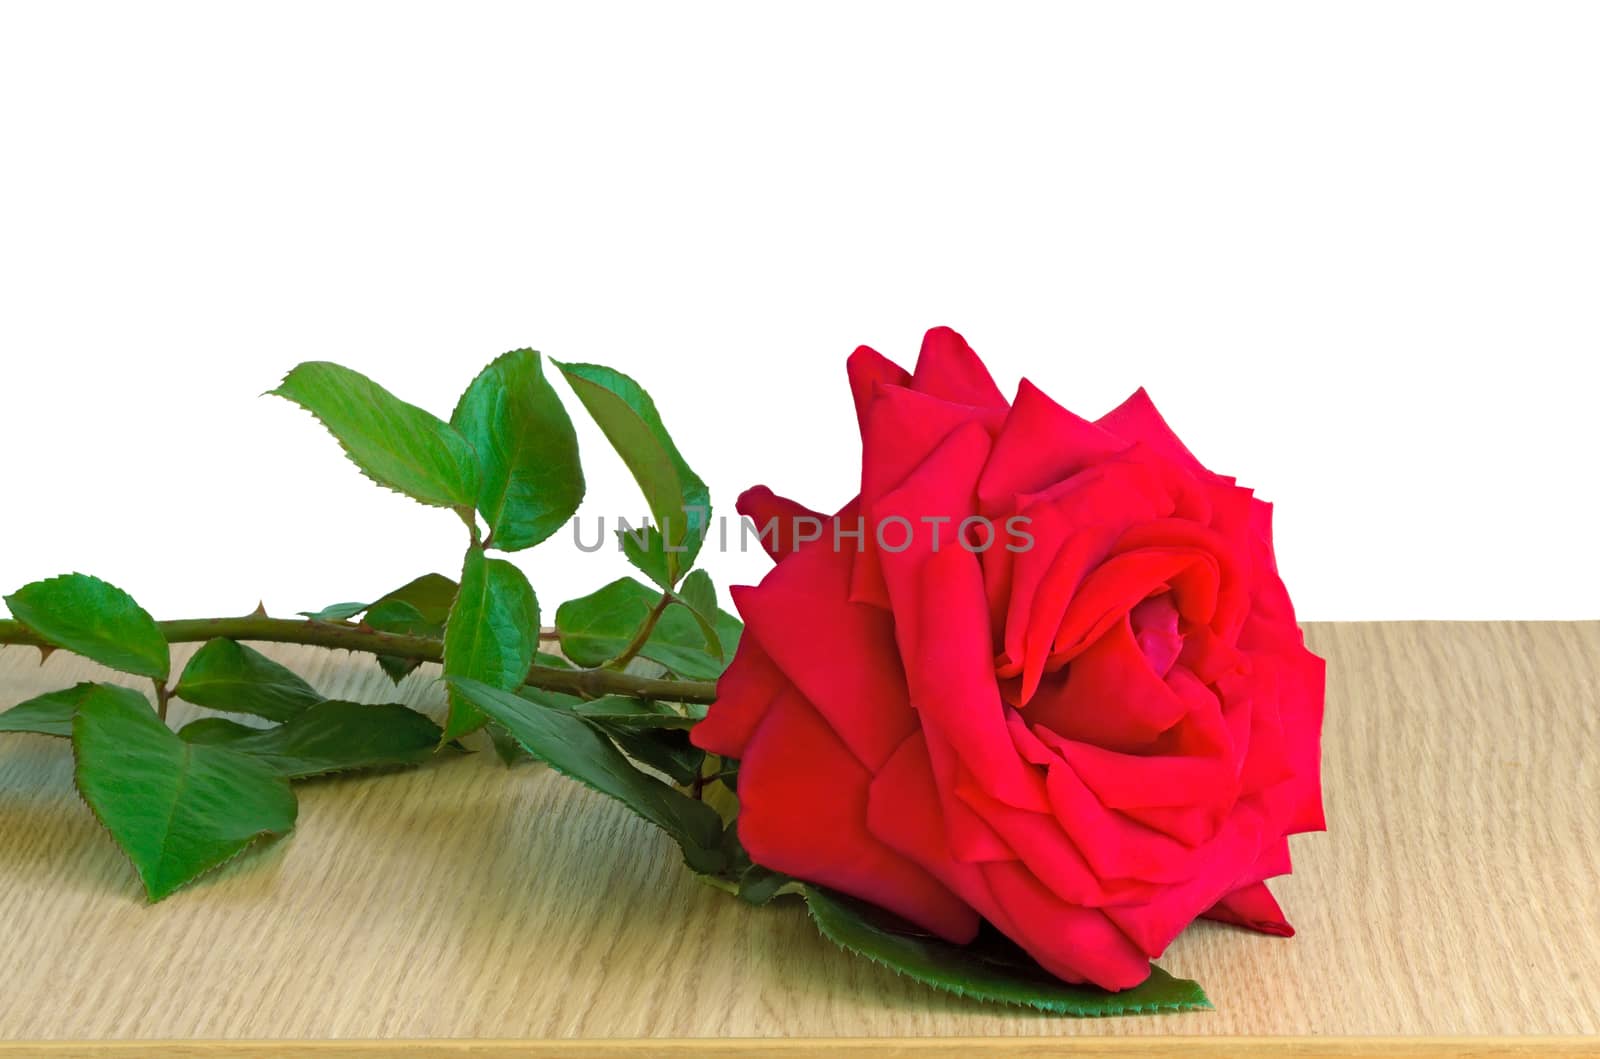 On the table lies a beautiful red rose. Presented on a white background.